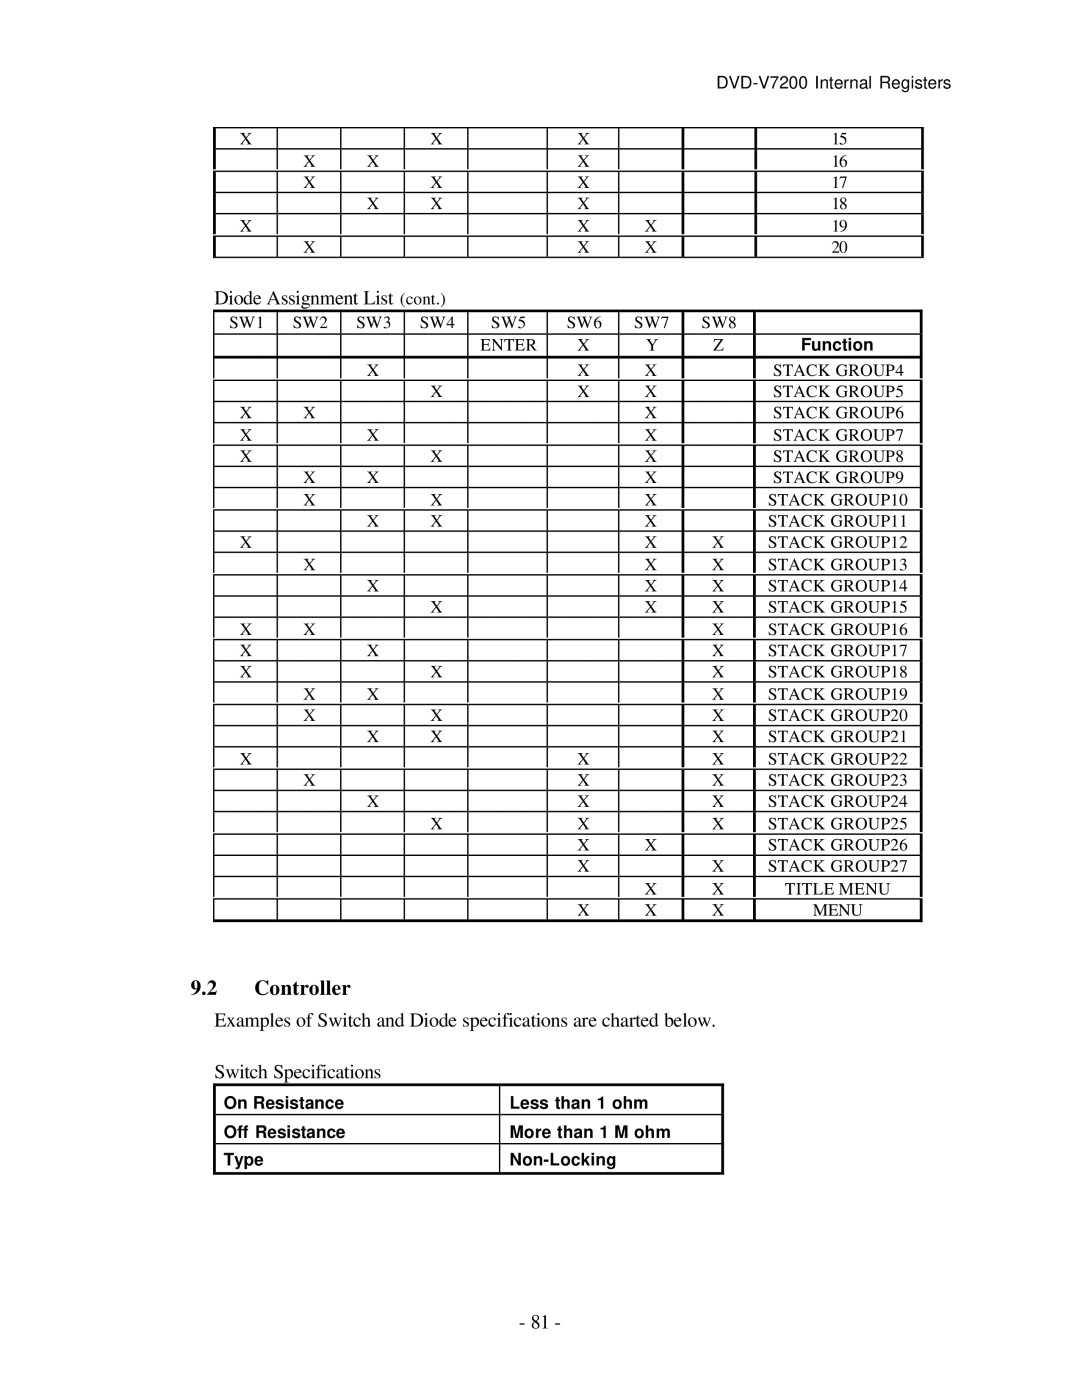 Pioneer RS-232C manual Controller, Diode Assignment List 